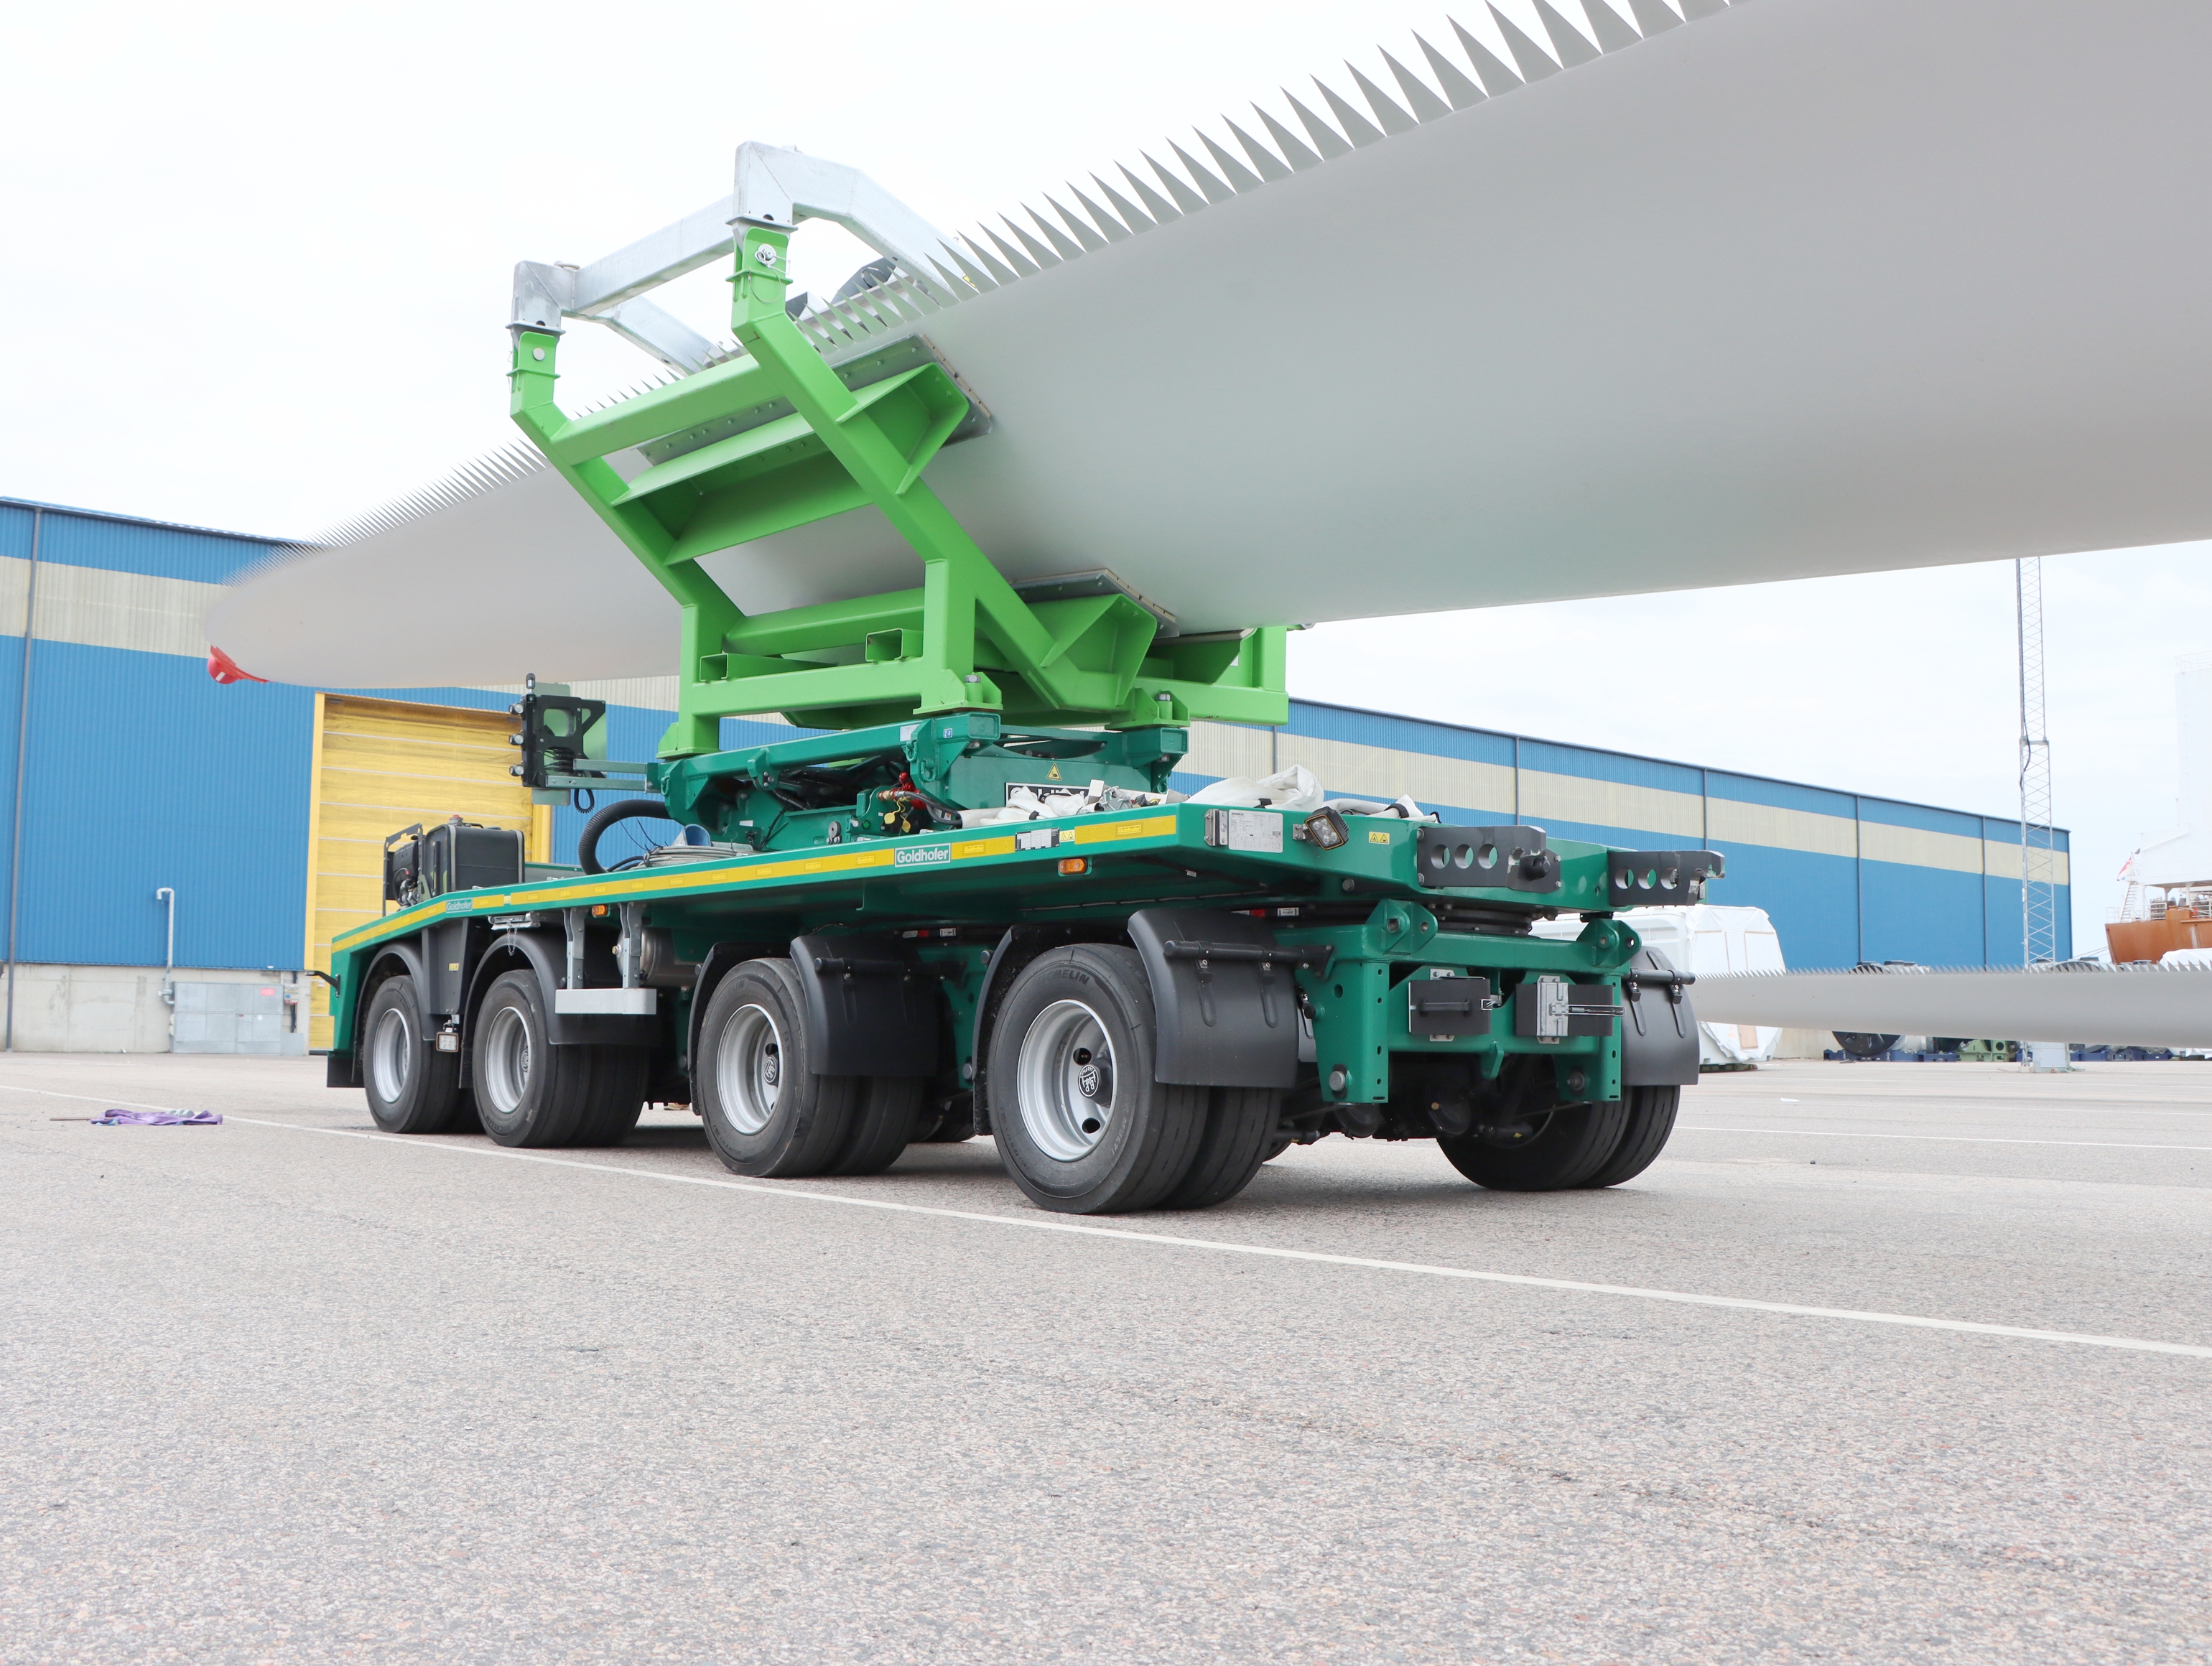 The trailing dolly with pneumatic suspension plus the new Goldhofer Interface and Vestas clamp ensure a smooth ride for the turbine blades. <br> Image source: Gold-hofer